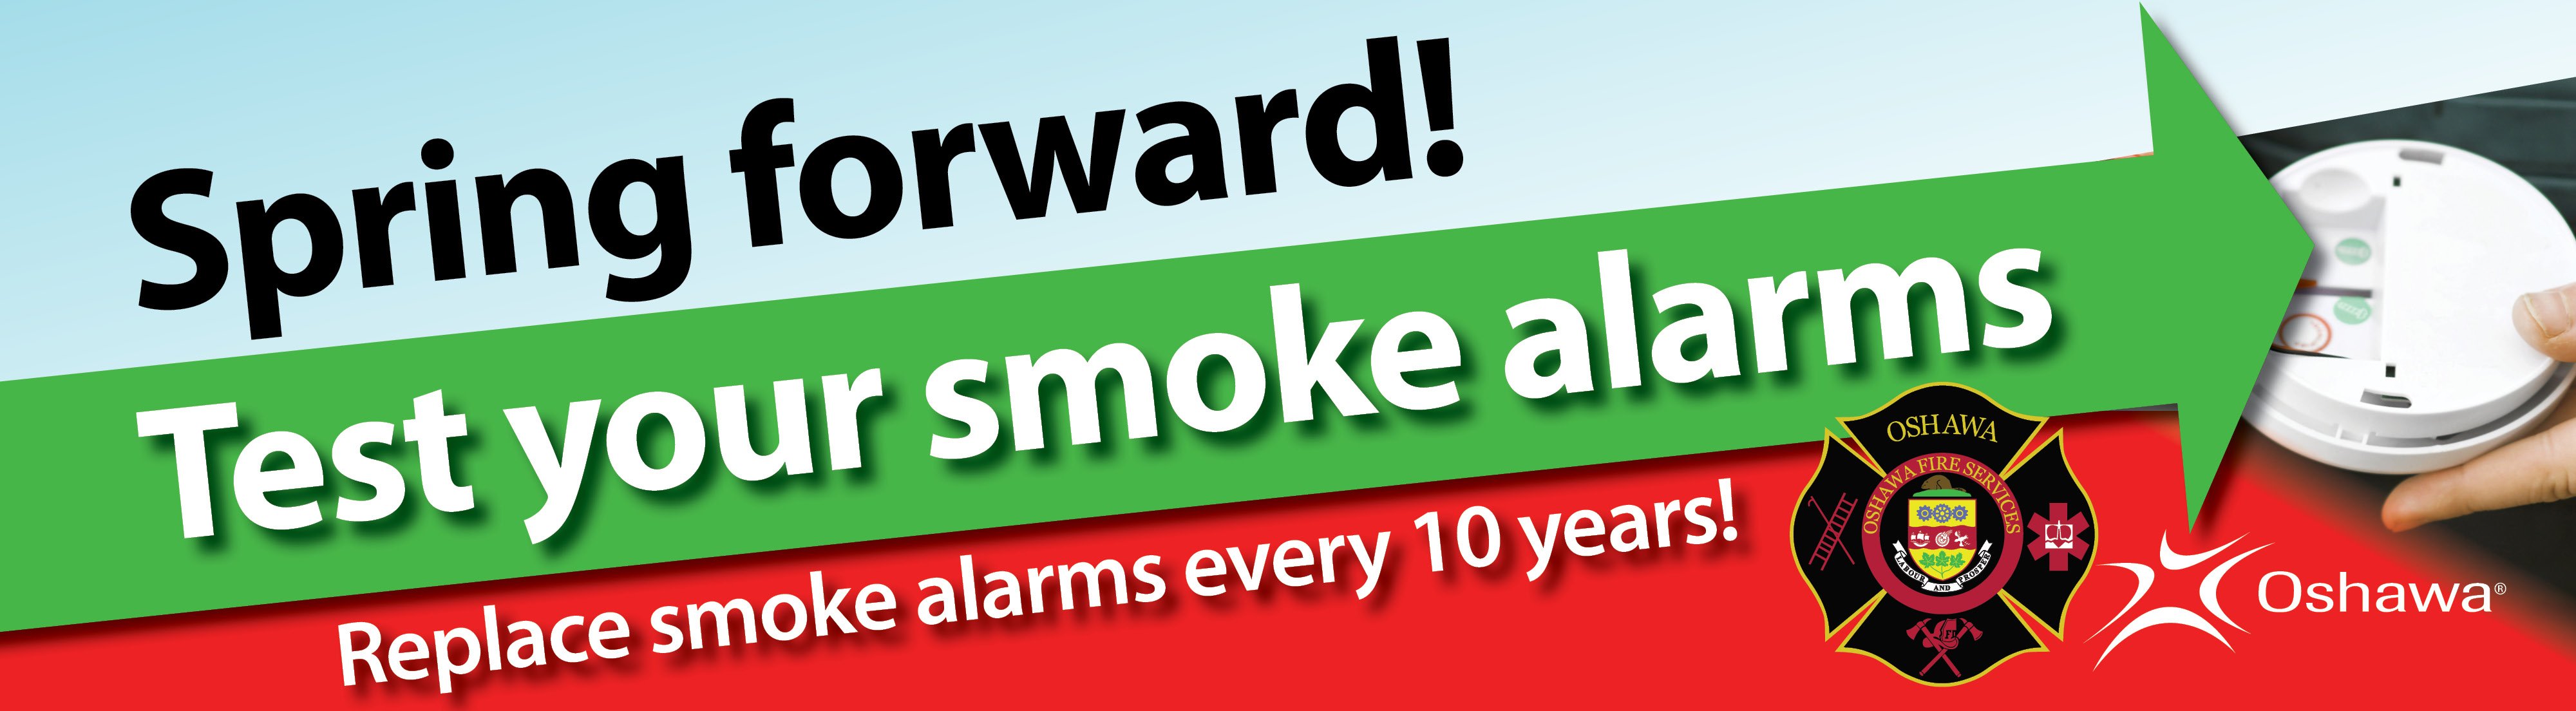 Spring forward, test your smoke alarm and replace every 10 years